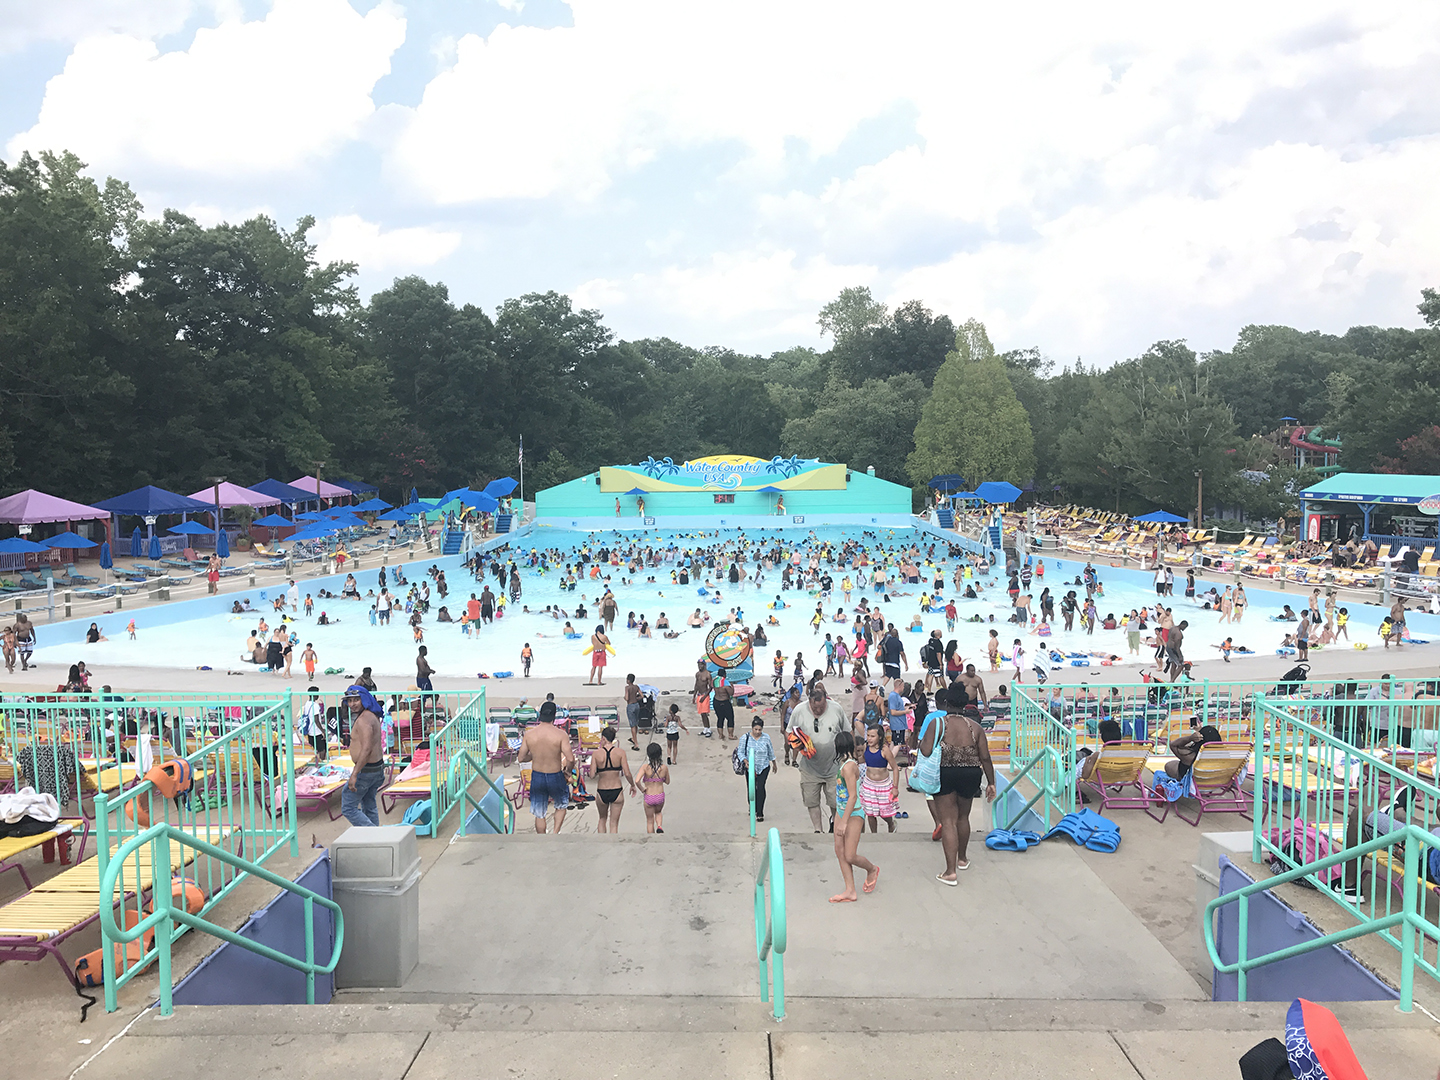 Our Day at Water Country USA | Tilley's Threads